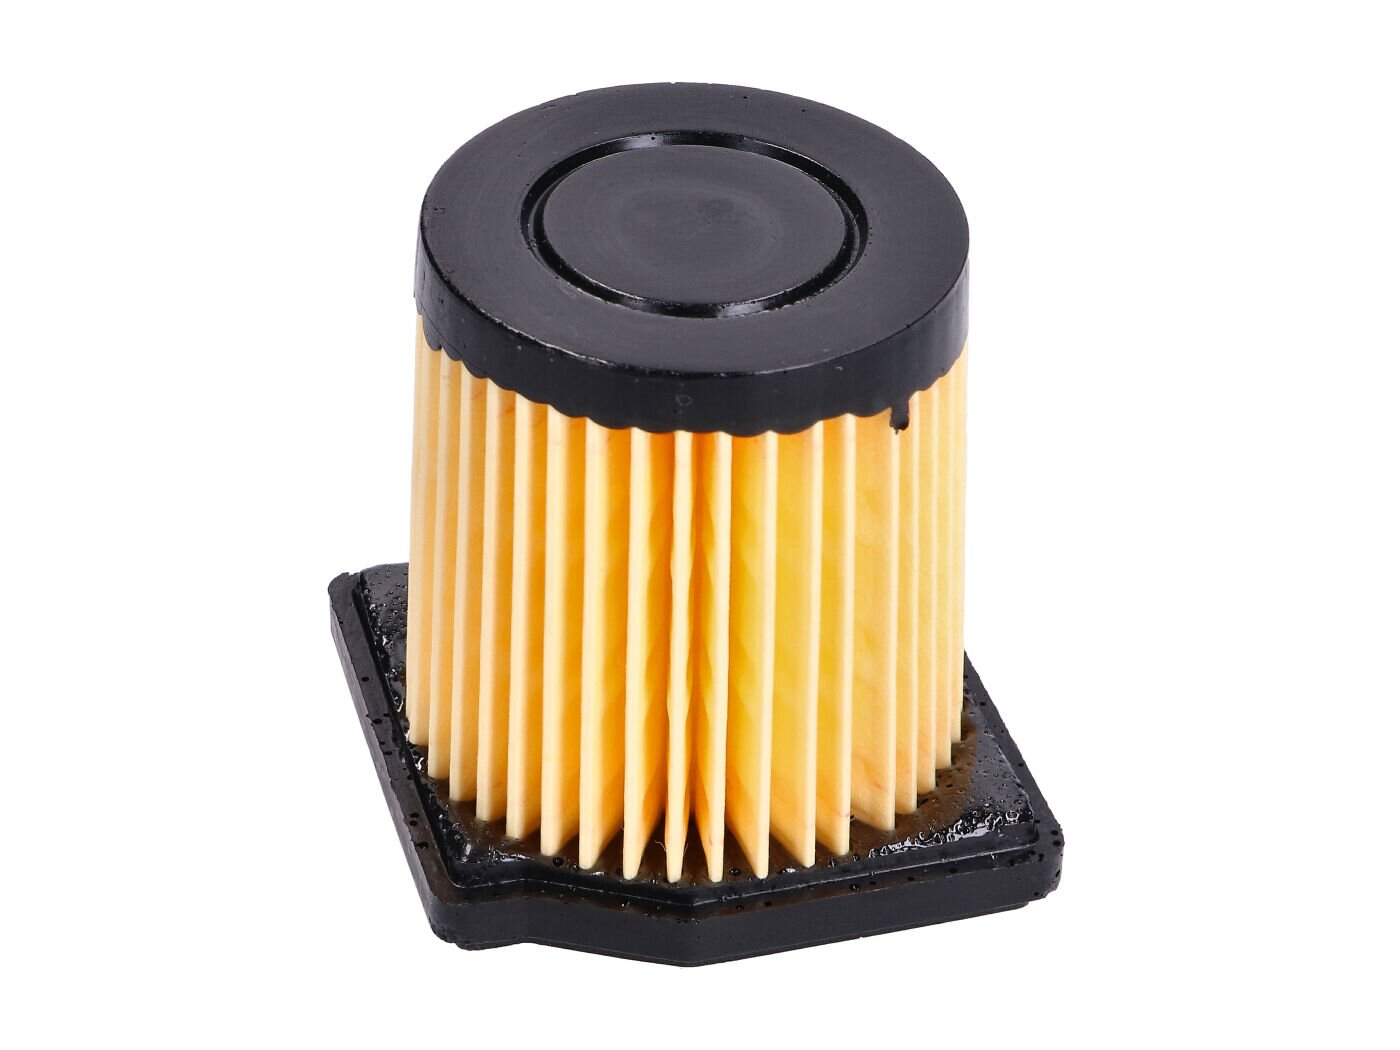 Tuning air filter 27 mm for DKW KTM Rixe Sachs 504 505 engine moped mofa new